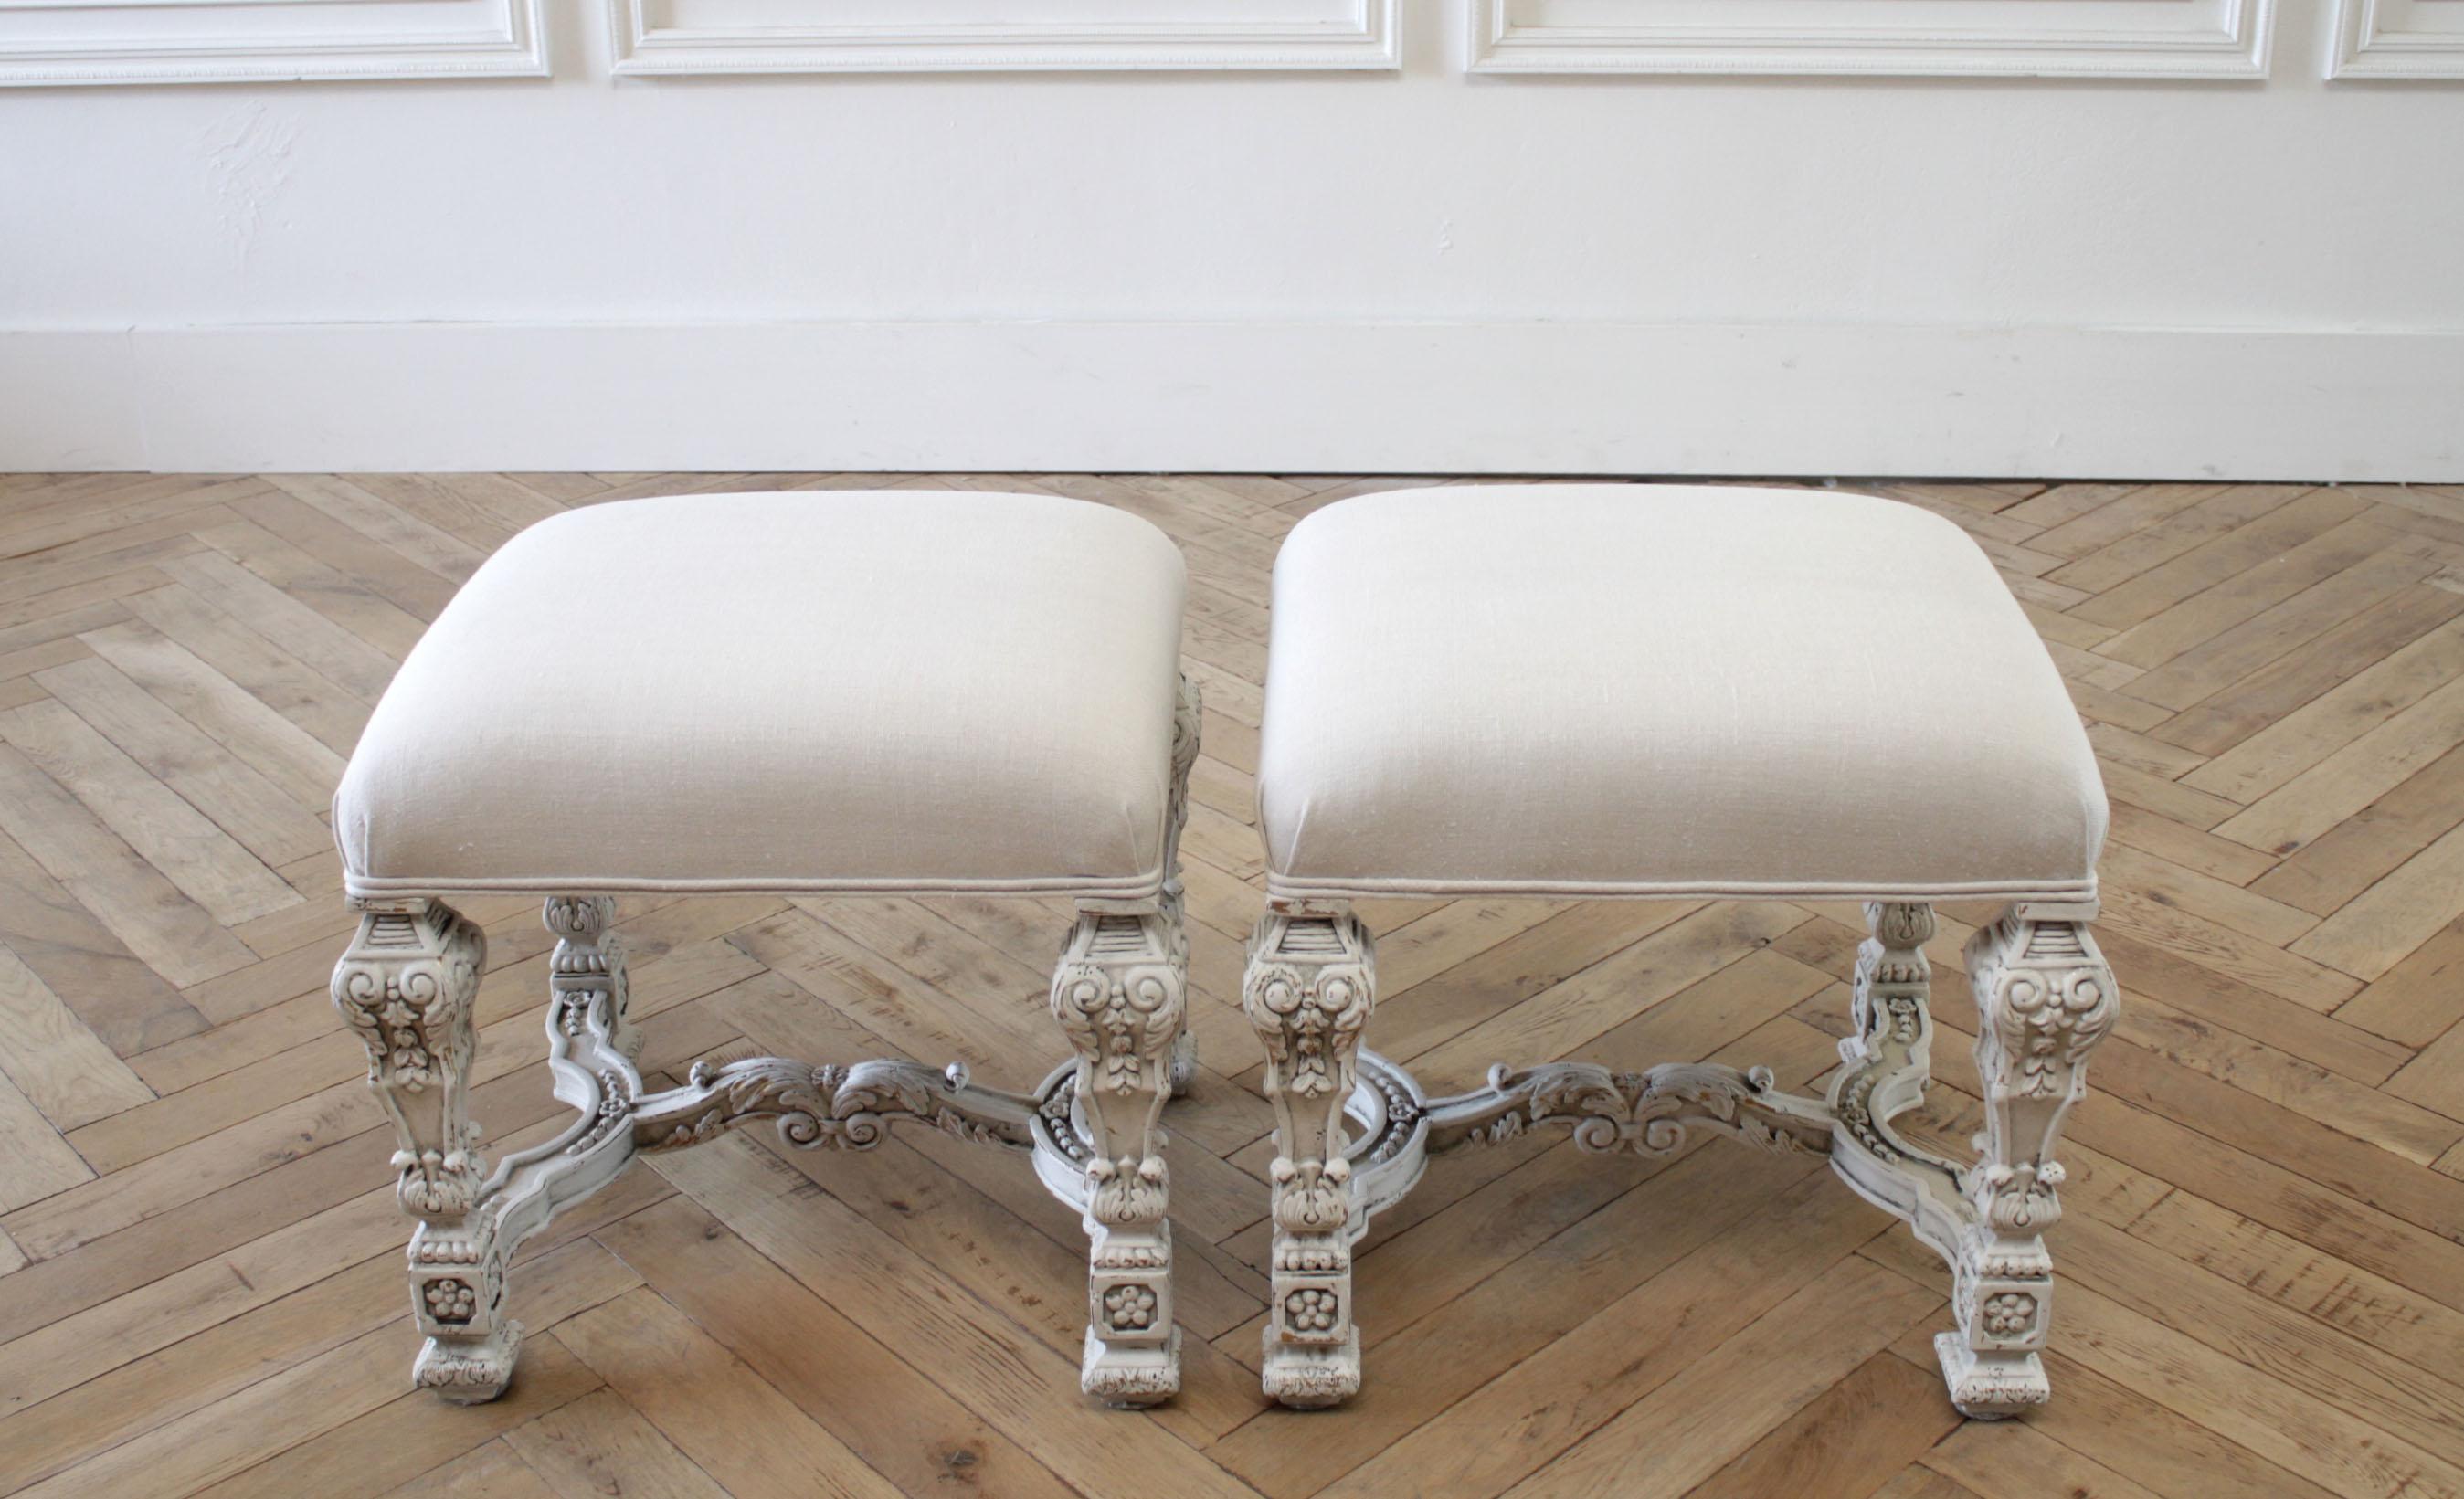 Italian painted and upholstered ottomans or vanity stools
Sold individually.
Painted in a soft oyster white, with subtle distressing, and finished with an antique glazed patina.
Upholstered in oatmeal light natural Belgian linen.
Solid and